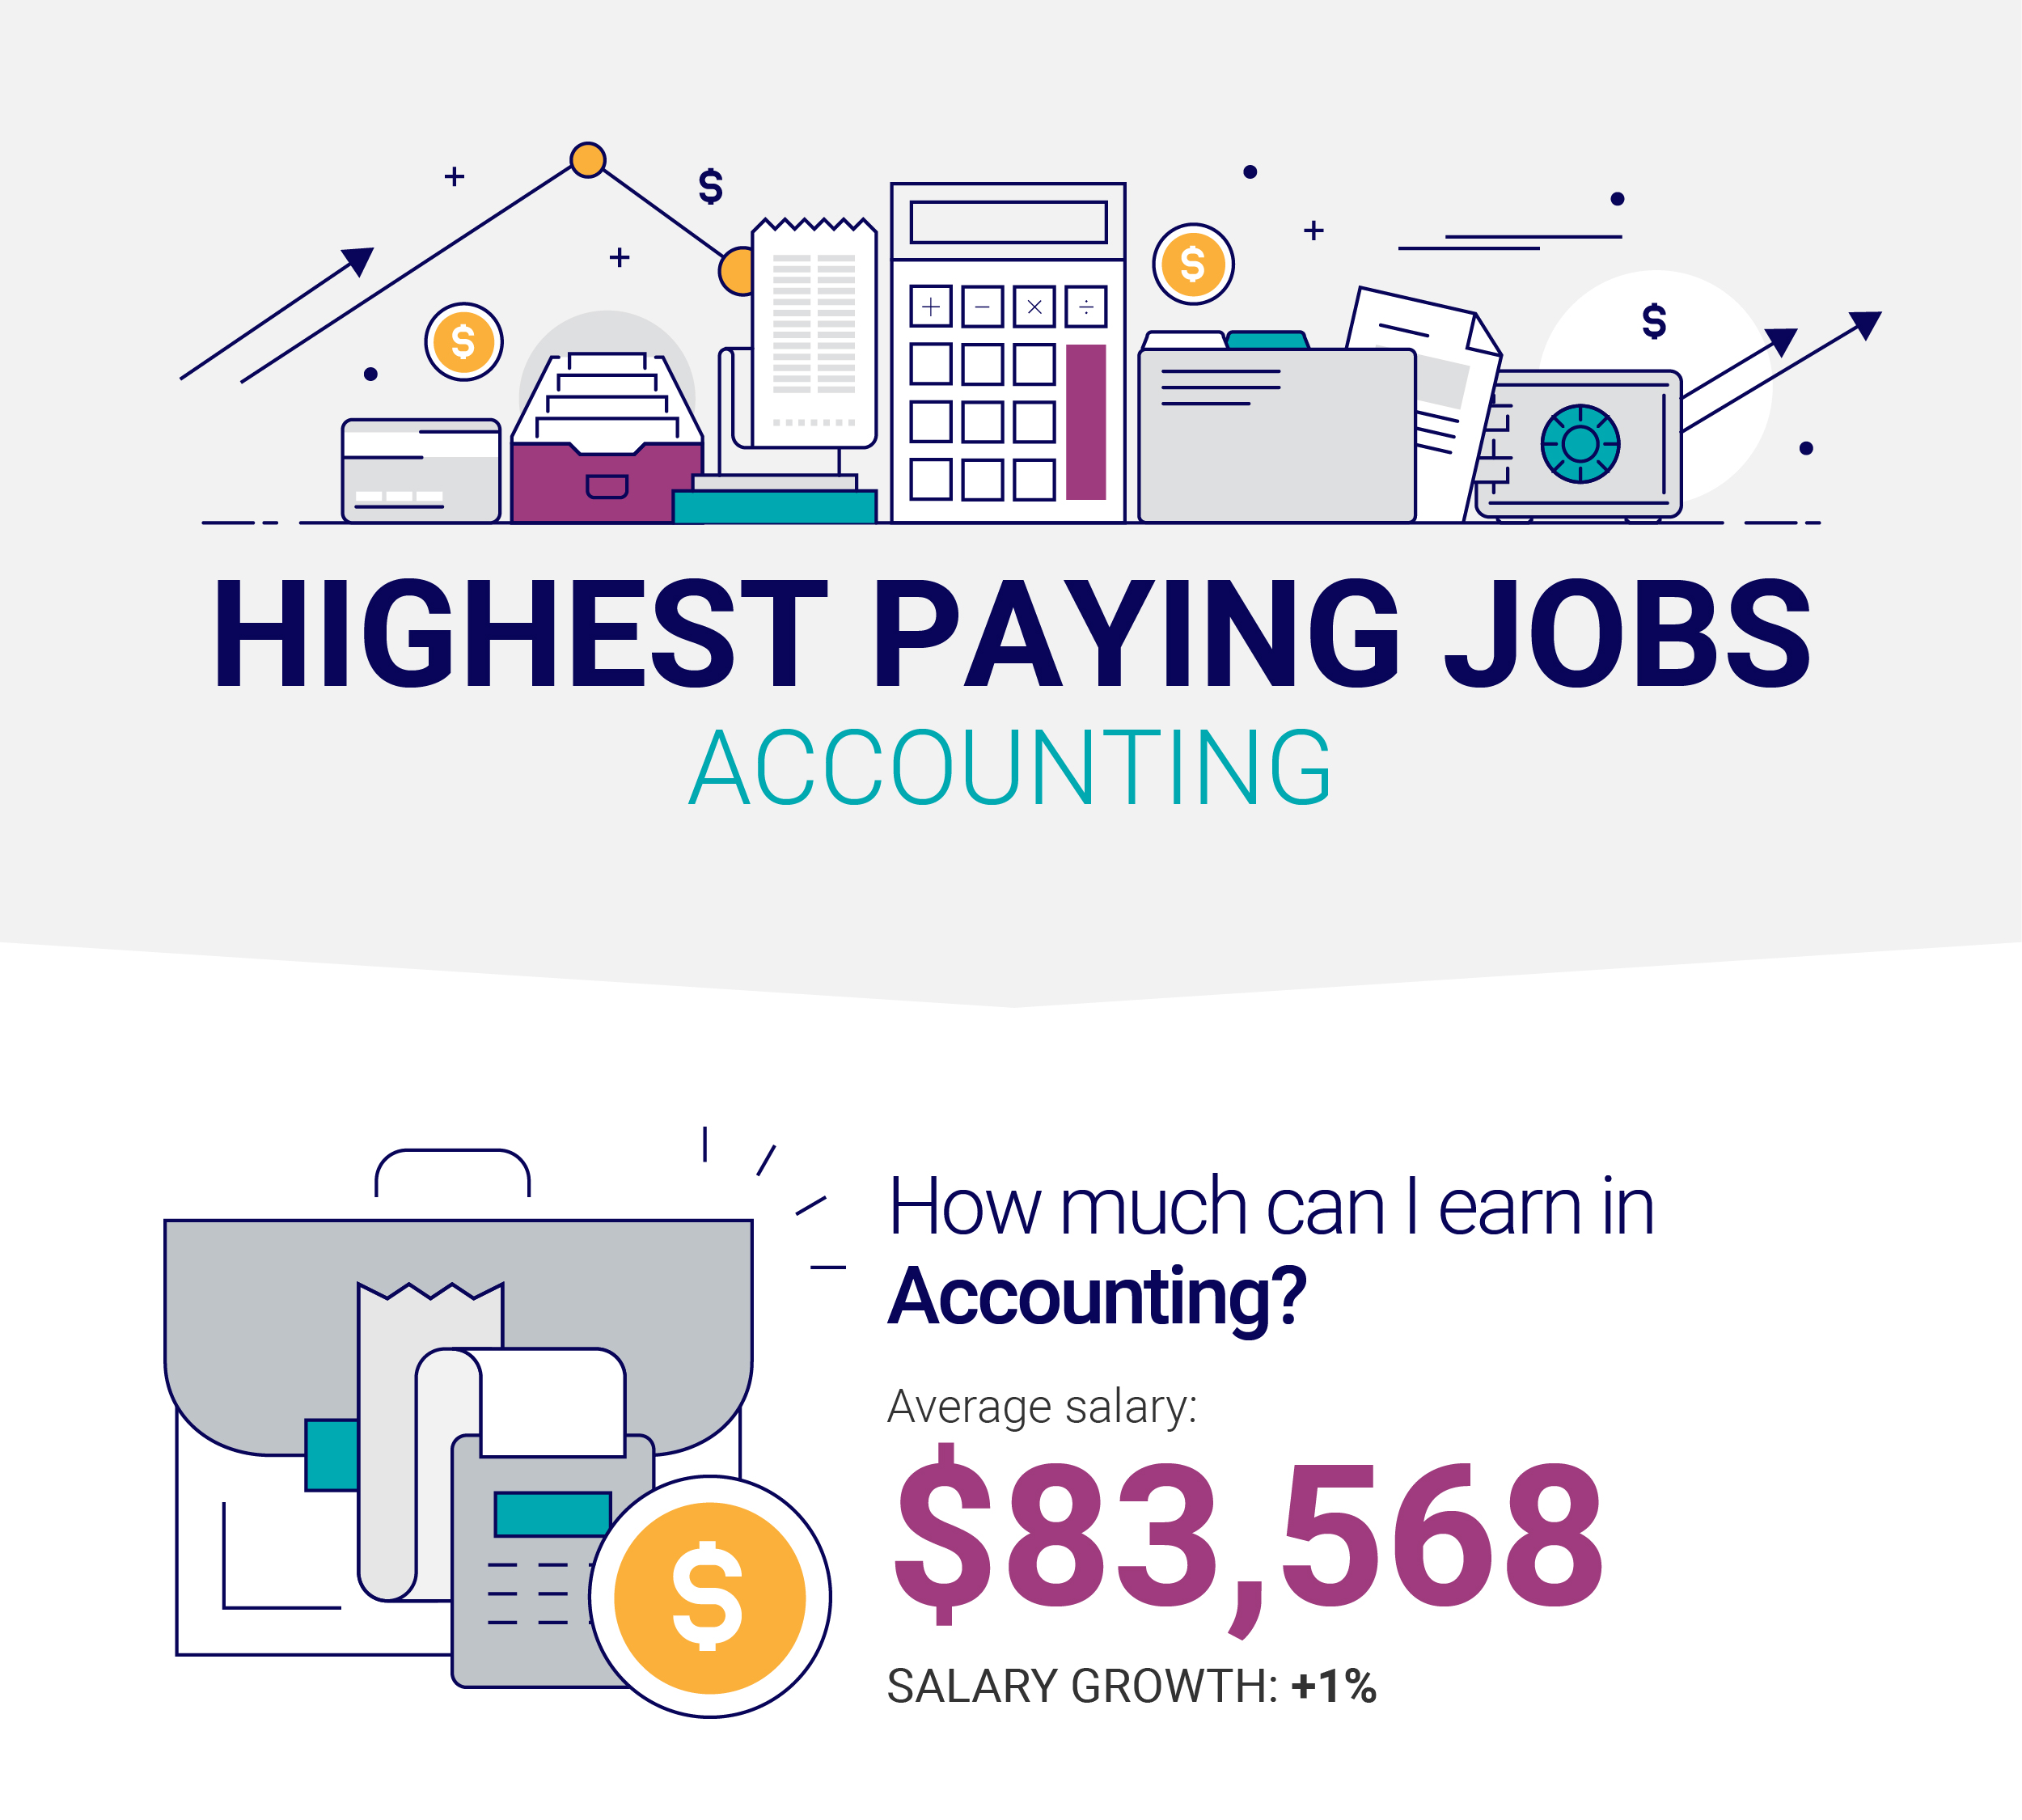 How much can I earn in Accounting?